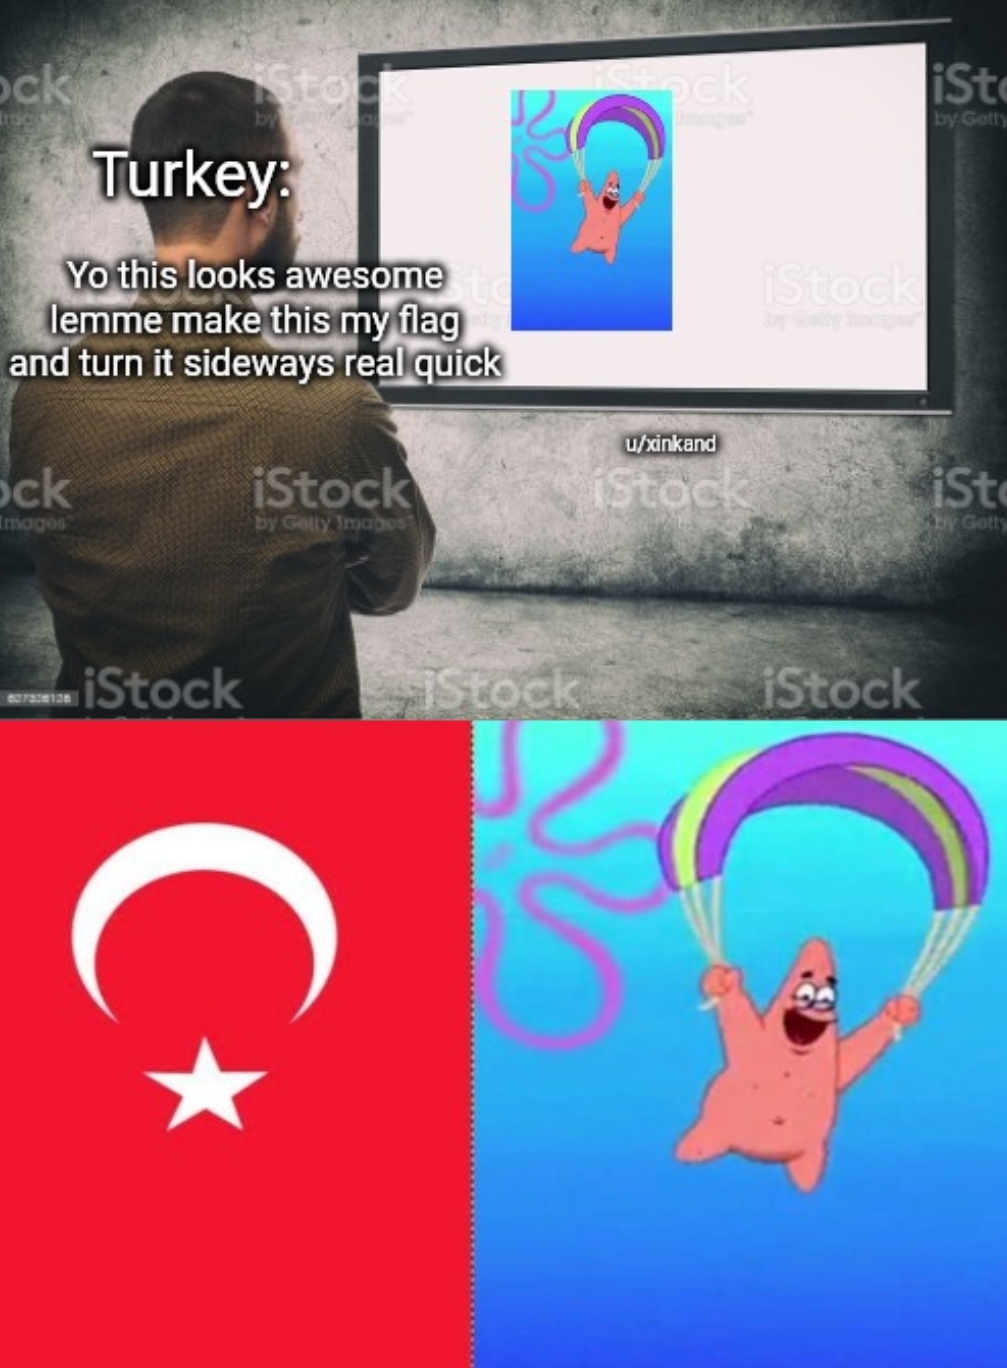 dank memes - graphic design - ista ock Turkey Yo this looks awesome lemme make this my flag and turn it sideways real quick xkand sck iStock iStock iSto iStock istock iStock C